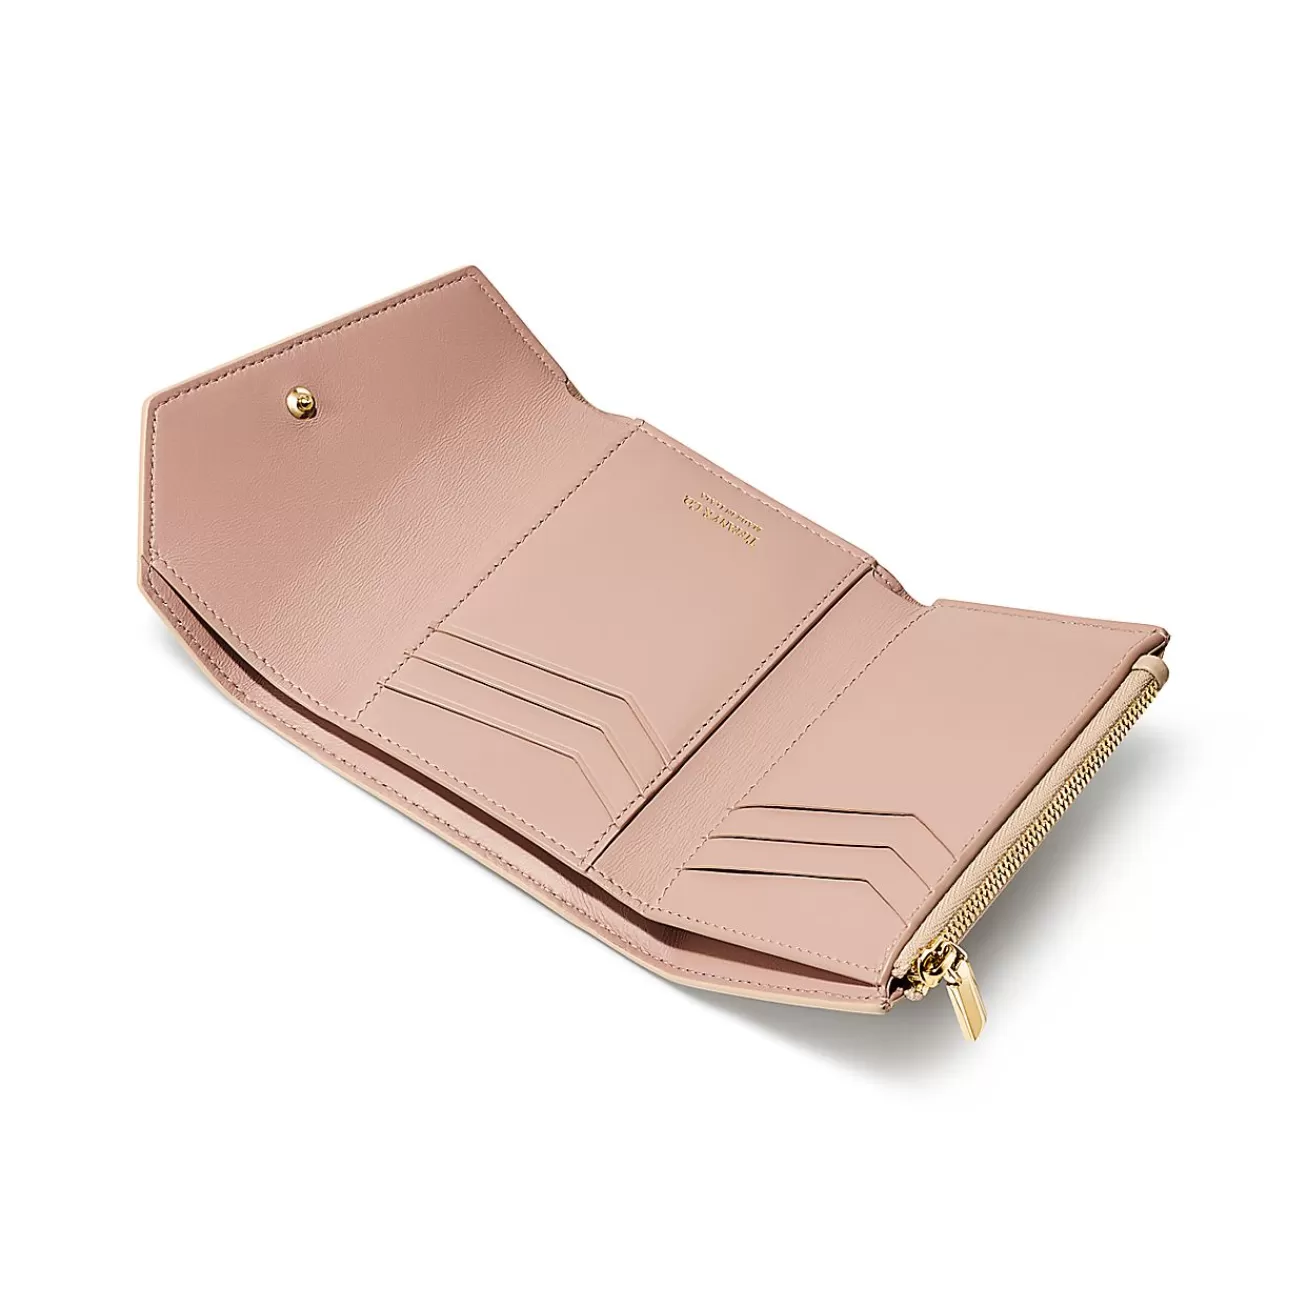 Tiffany & Co. Tiffany T Wallet in Taupe Leather | ^Women Small Leather Goods | Women's Accessories